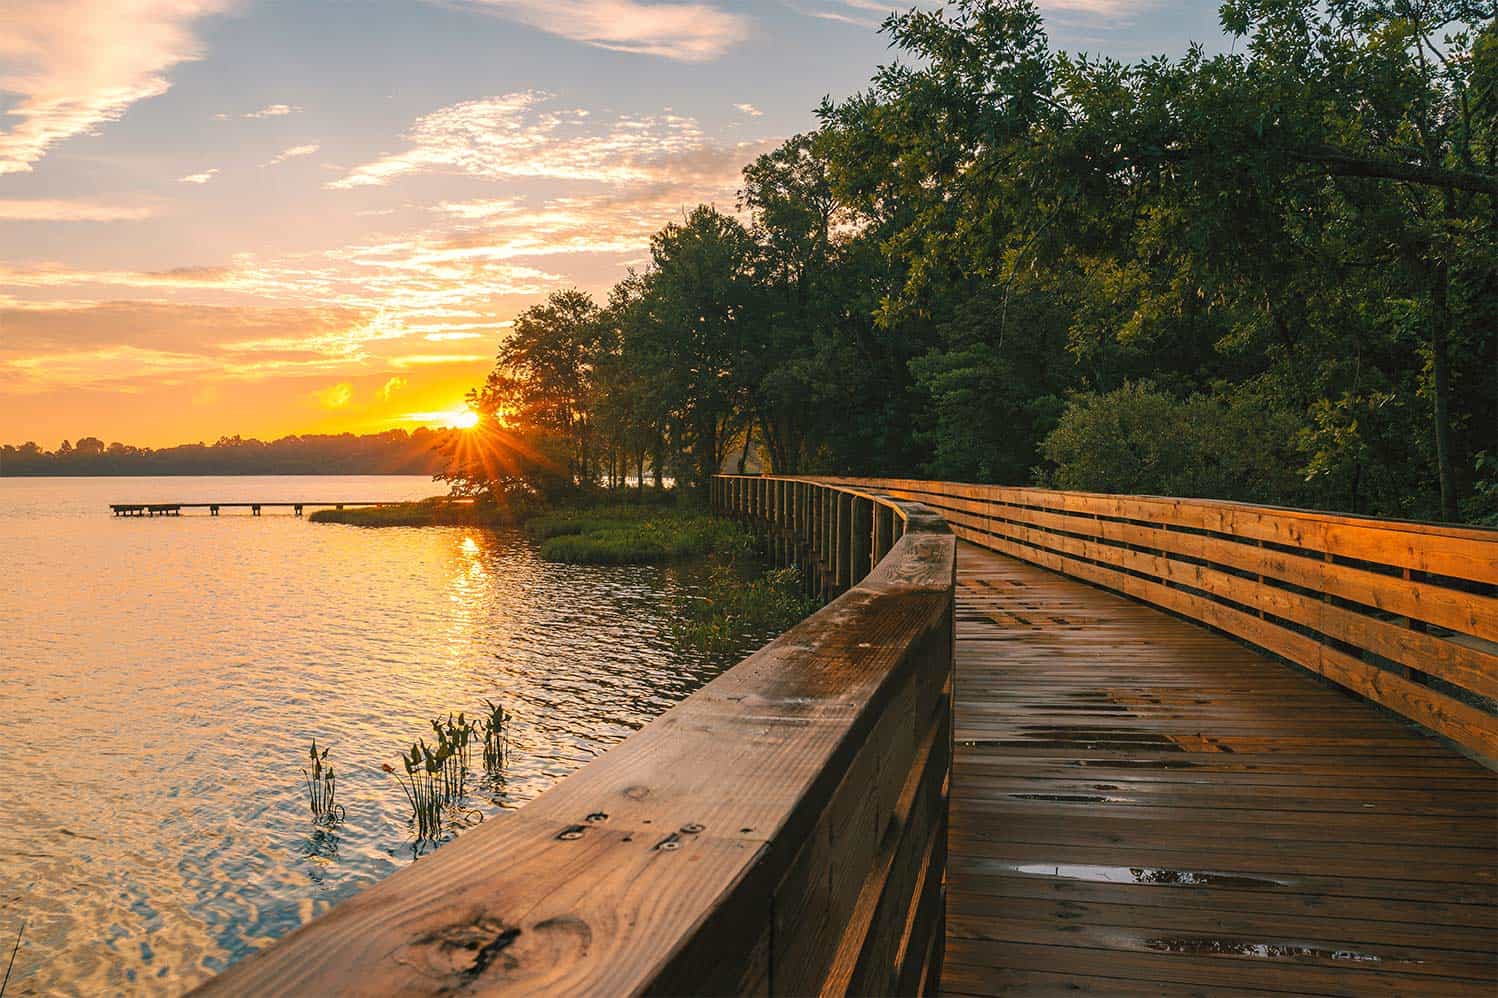 The Hopewell Riverwalk has opened up the scenic Appomattox River to more access. Photo by Daniel Jones, courtesy of Virginia Tourism Corporation. CRLC and our partners are building coastal resilience through land conservation.